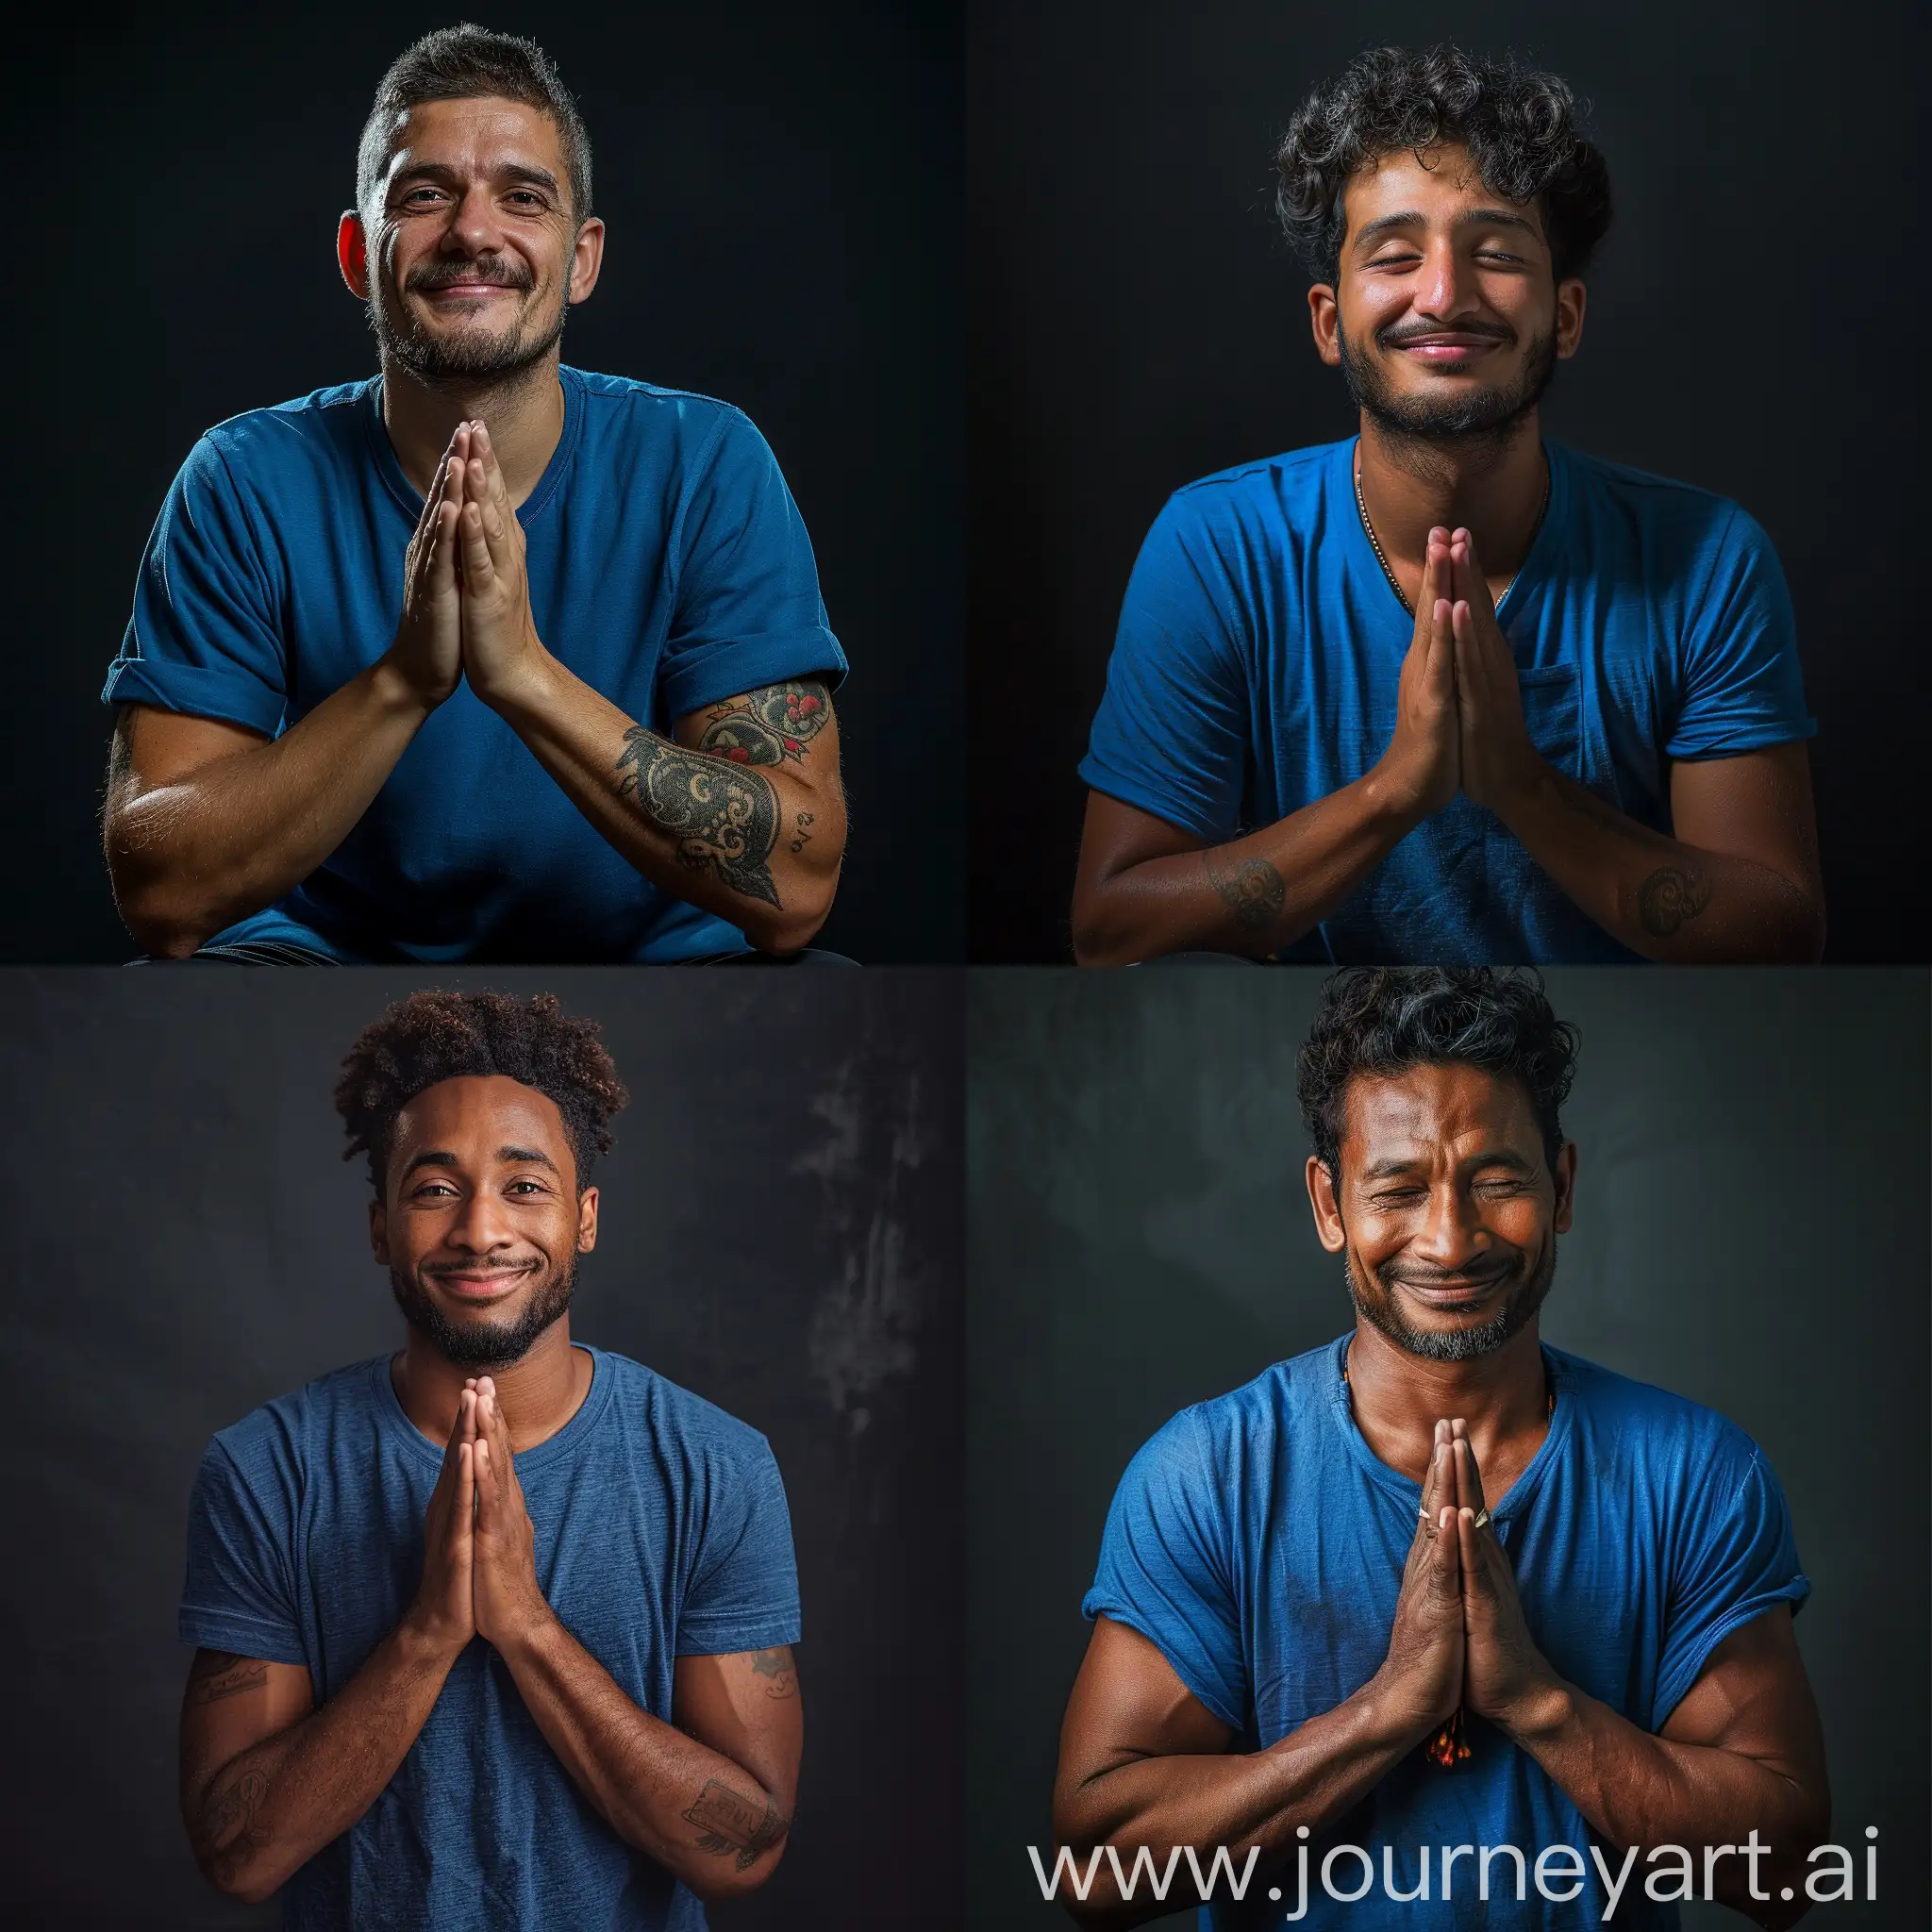 Medium Shot of a Men Praying Looking to Camera with Smile, Blue T-shirt, Dark Background, Adobe Photoshop Software, High Quality 